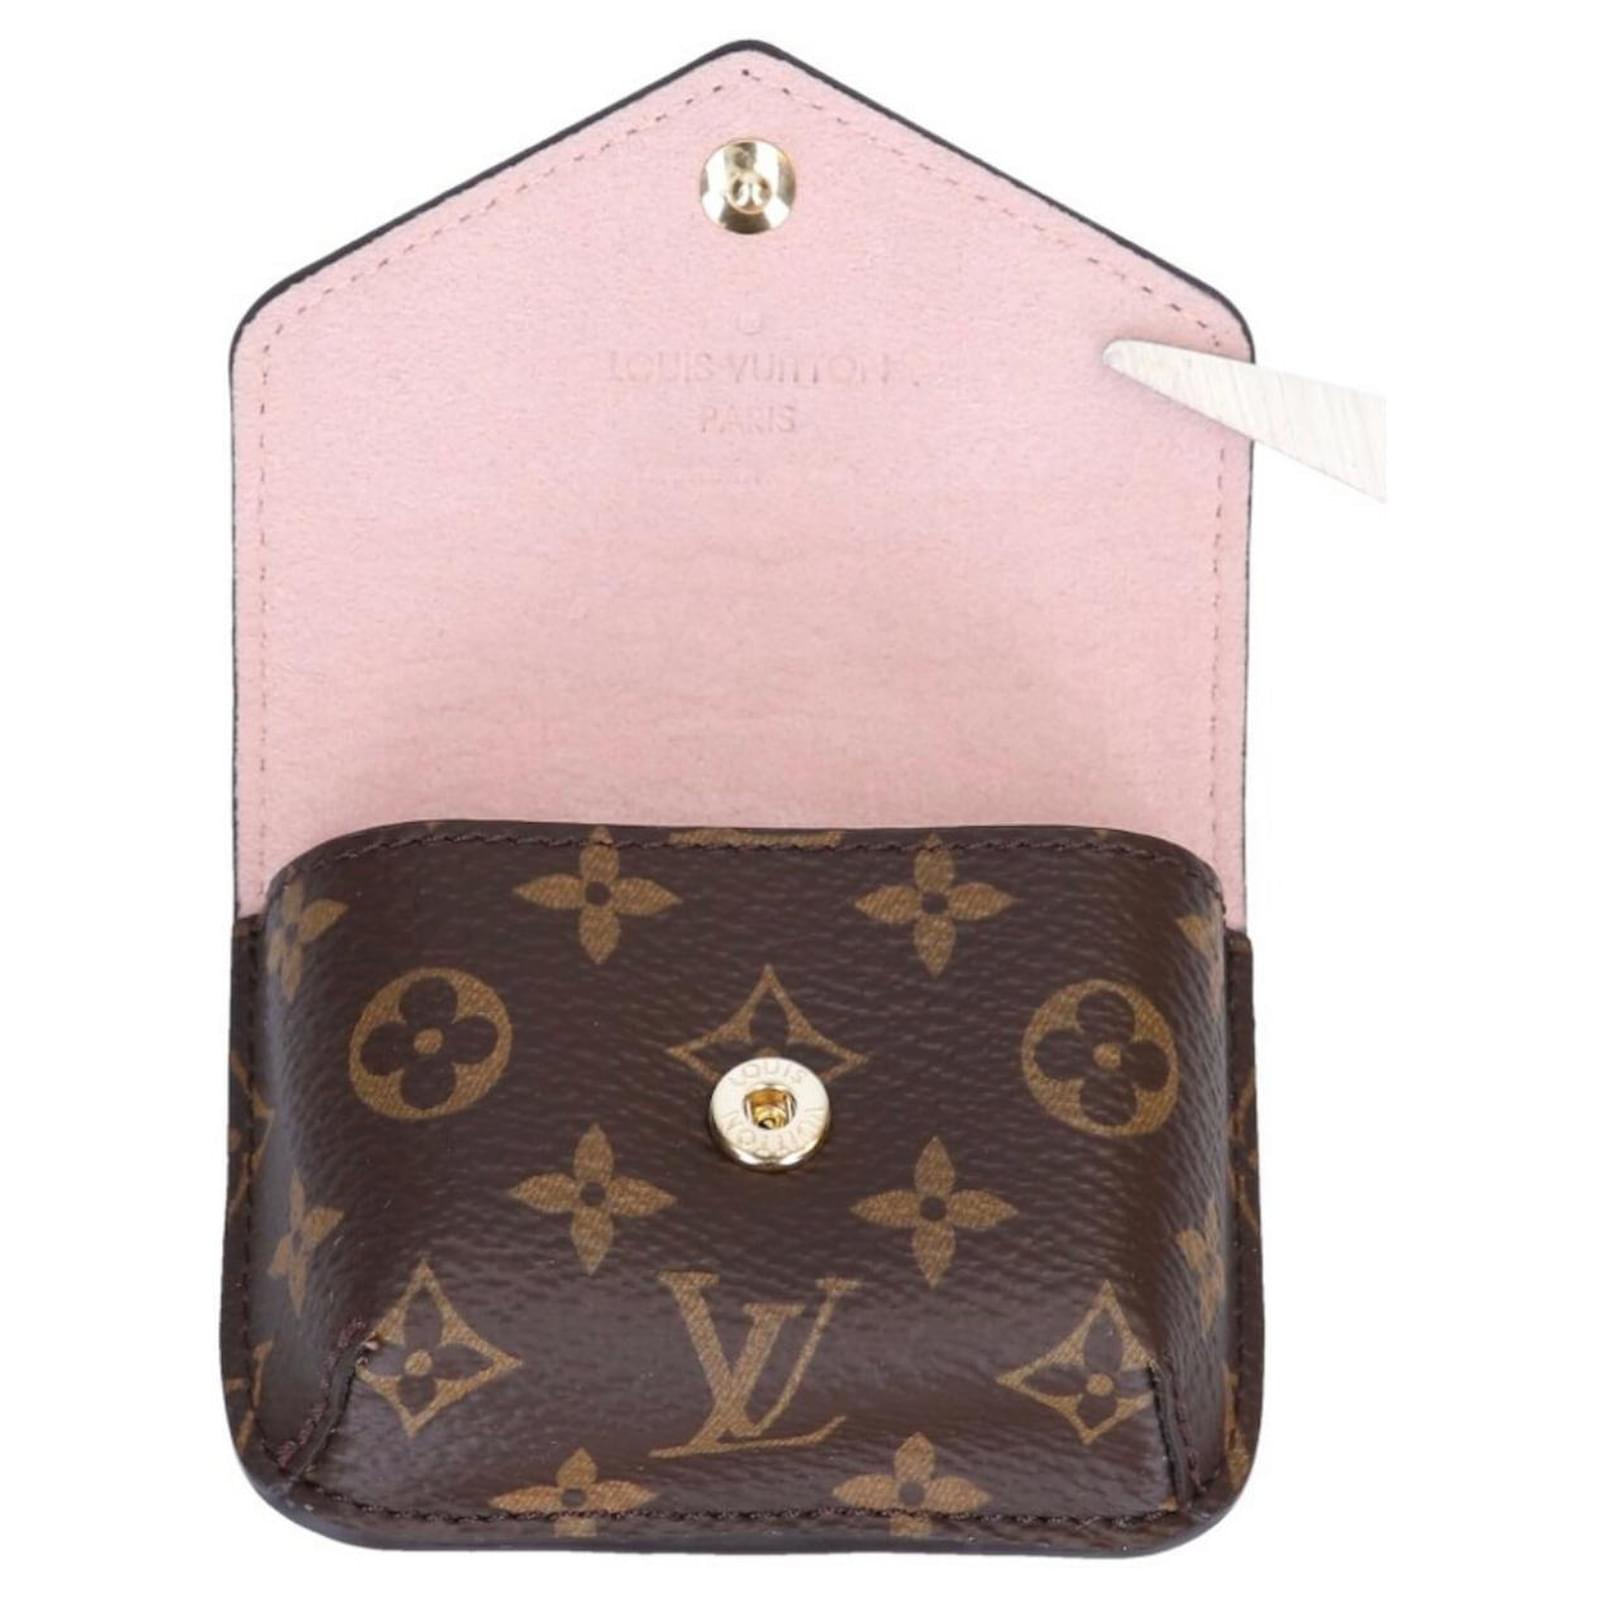 pink and brown louis vuitton purse